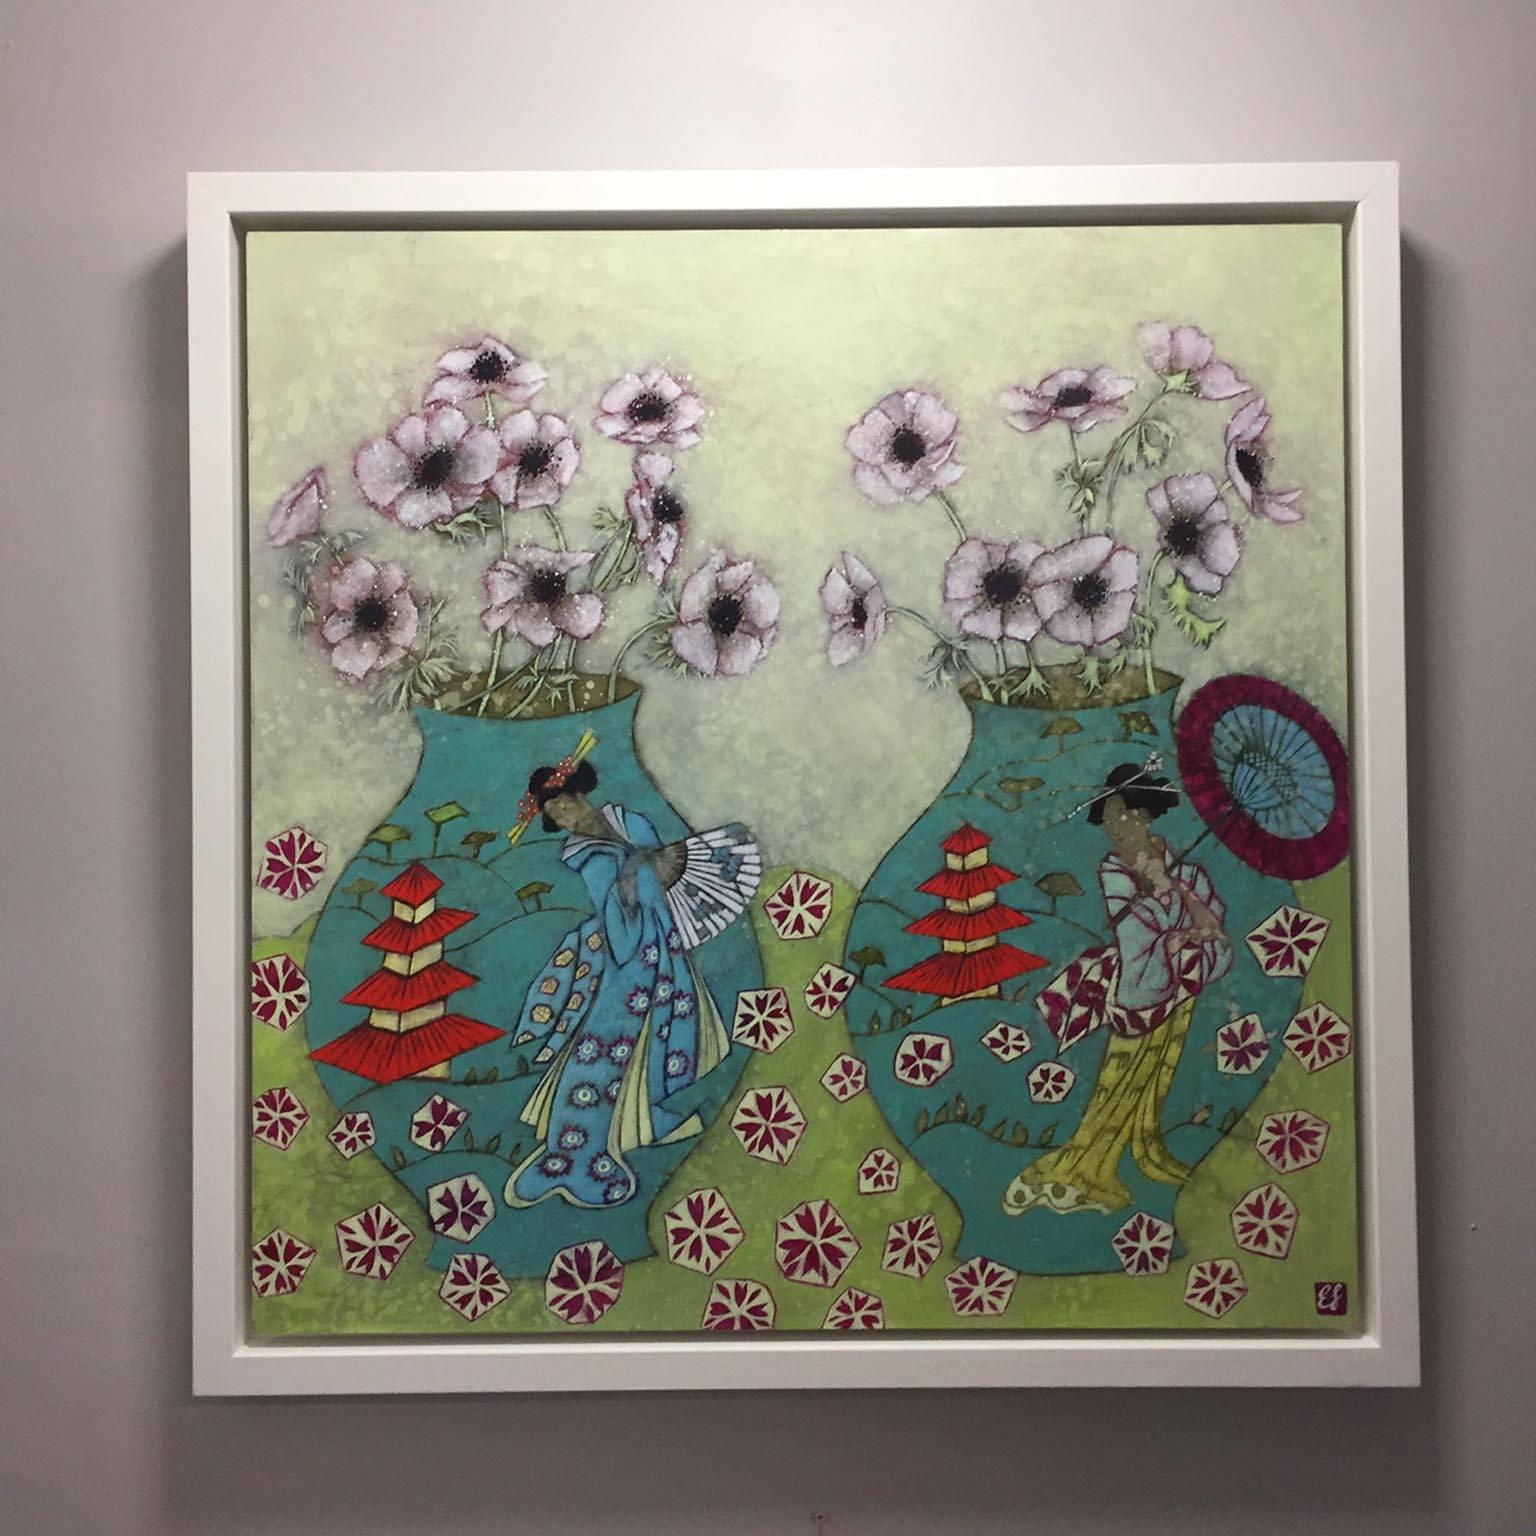 Heavenly Anemones - Painting by Emma Forrester